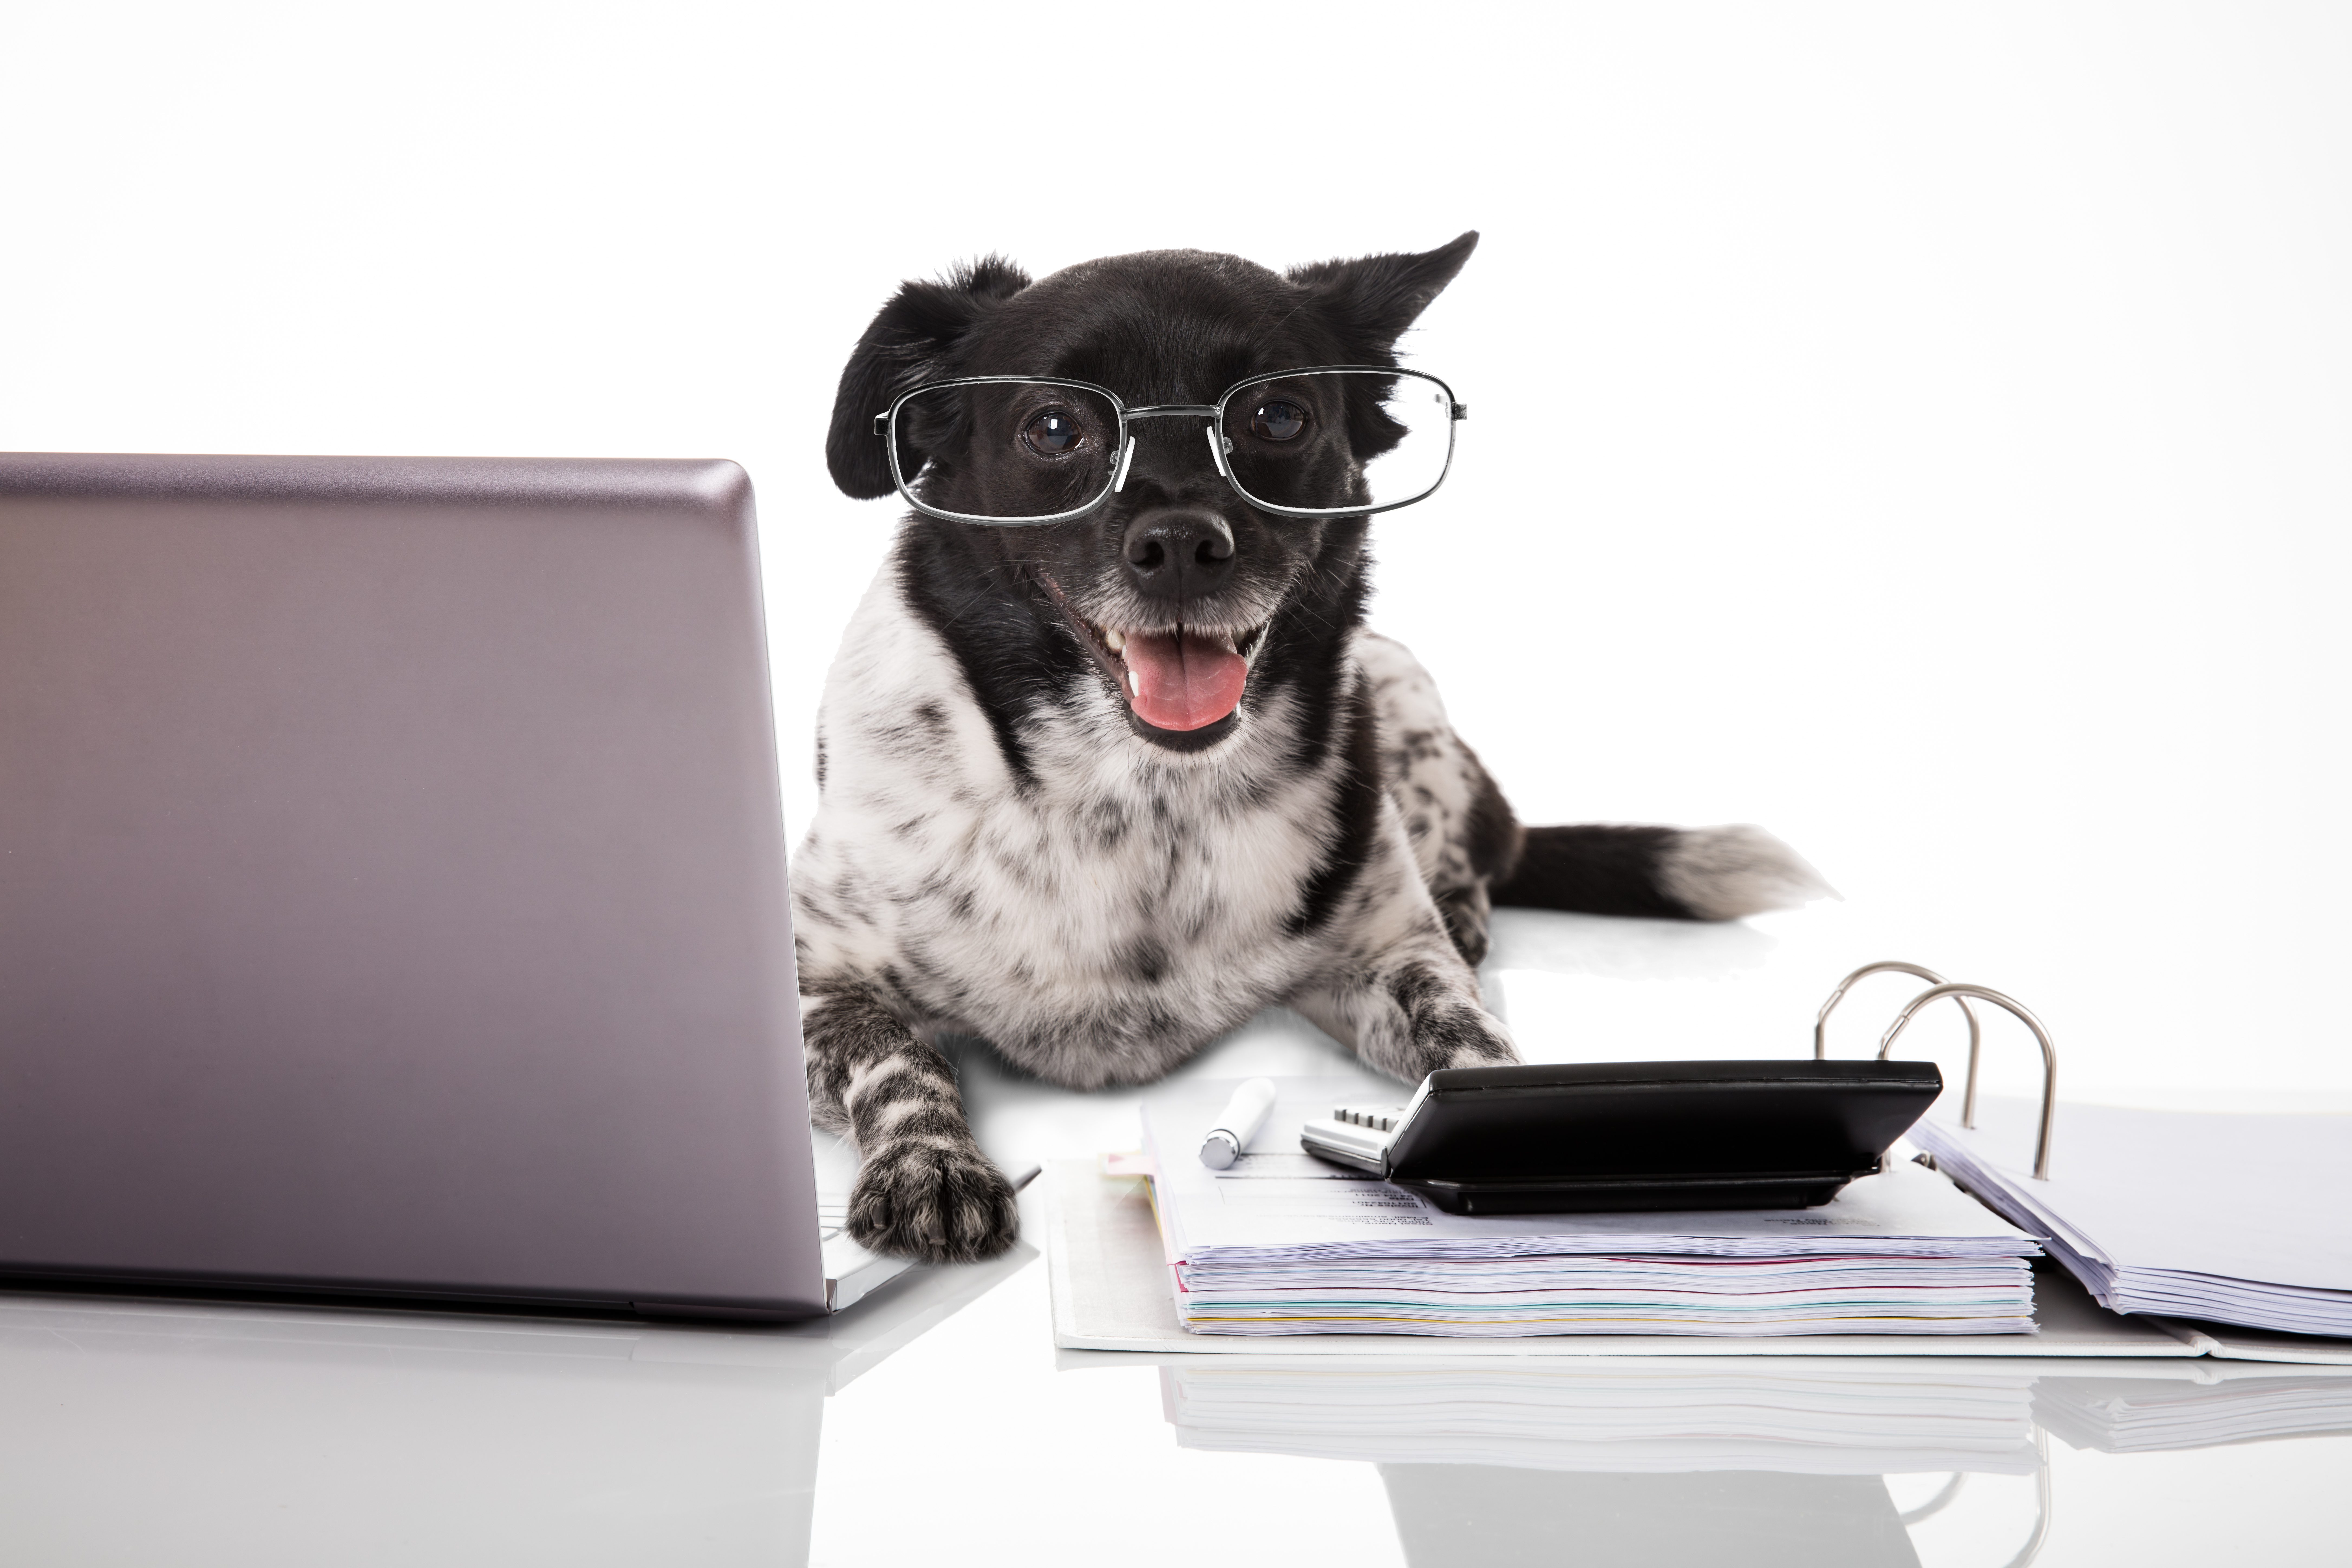 Dog Wearing Eyeglasses With Laptop And Calculator